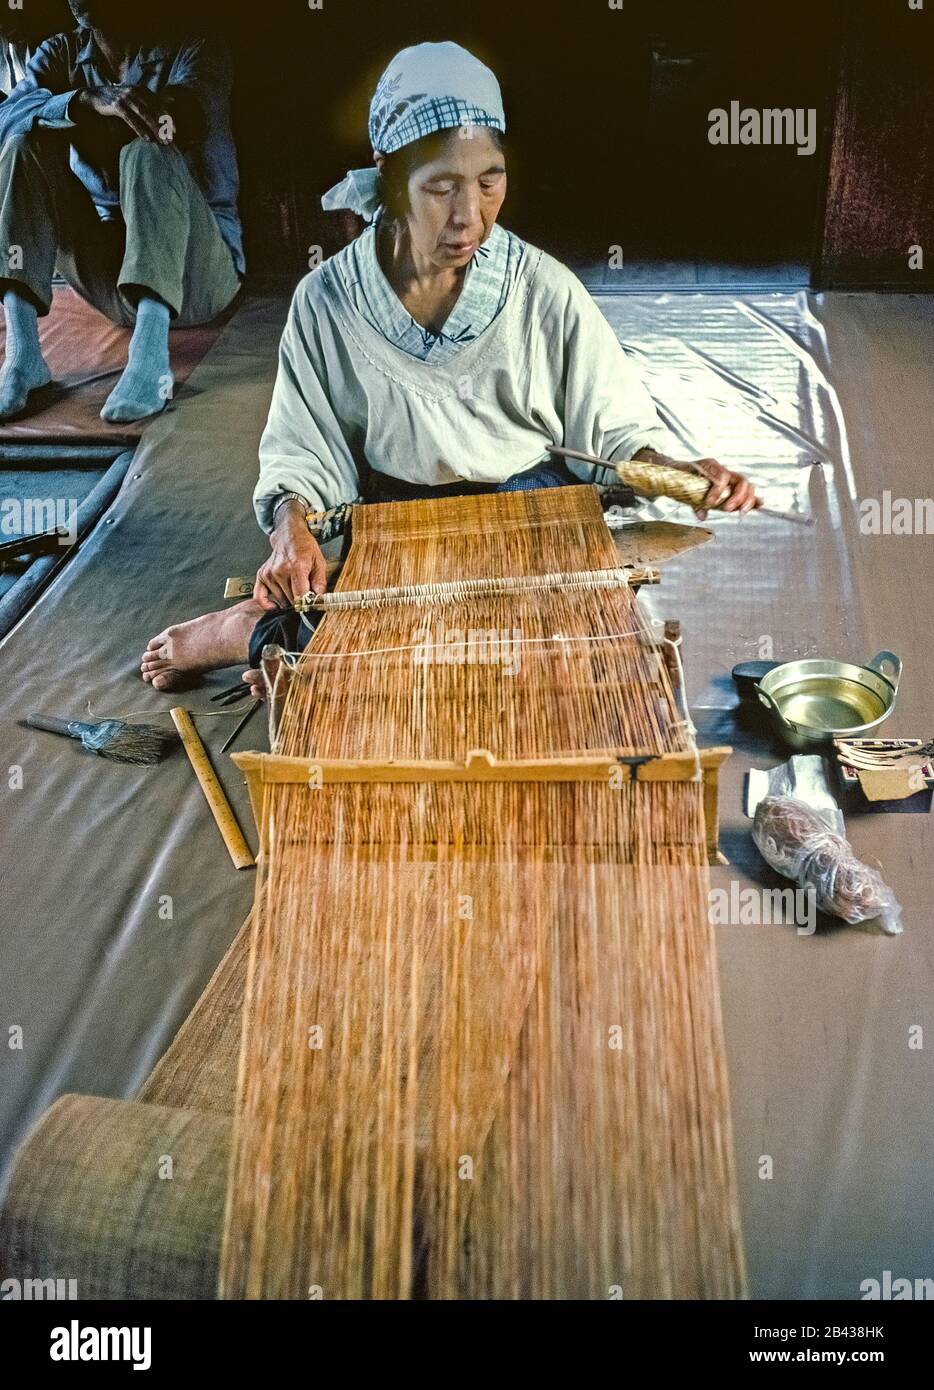 An Ainu woman uses the tedious traditional way to weave matting while sitting on the floor of her native home on the island of Hokkaido in northern Japan. The material is then made into placemats and tablecloths to sell as souvenirs in special Ainu villages that give Japanese tourists a glimpse of bygone aboriginal life. Only 300 pure-blooded Ainu (pronounced I-noo) were still living when this historical photograph was taken in 1962. The Ainu were officially recognized as indigenous people of Japan in 2008. Stock Photo